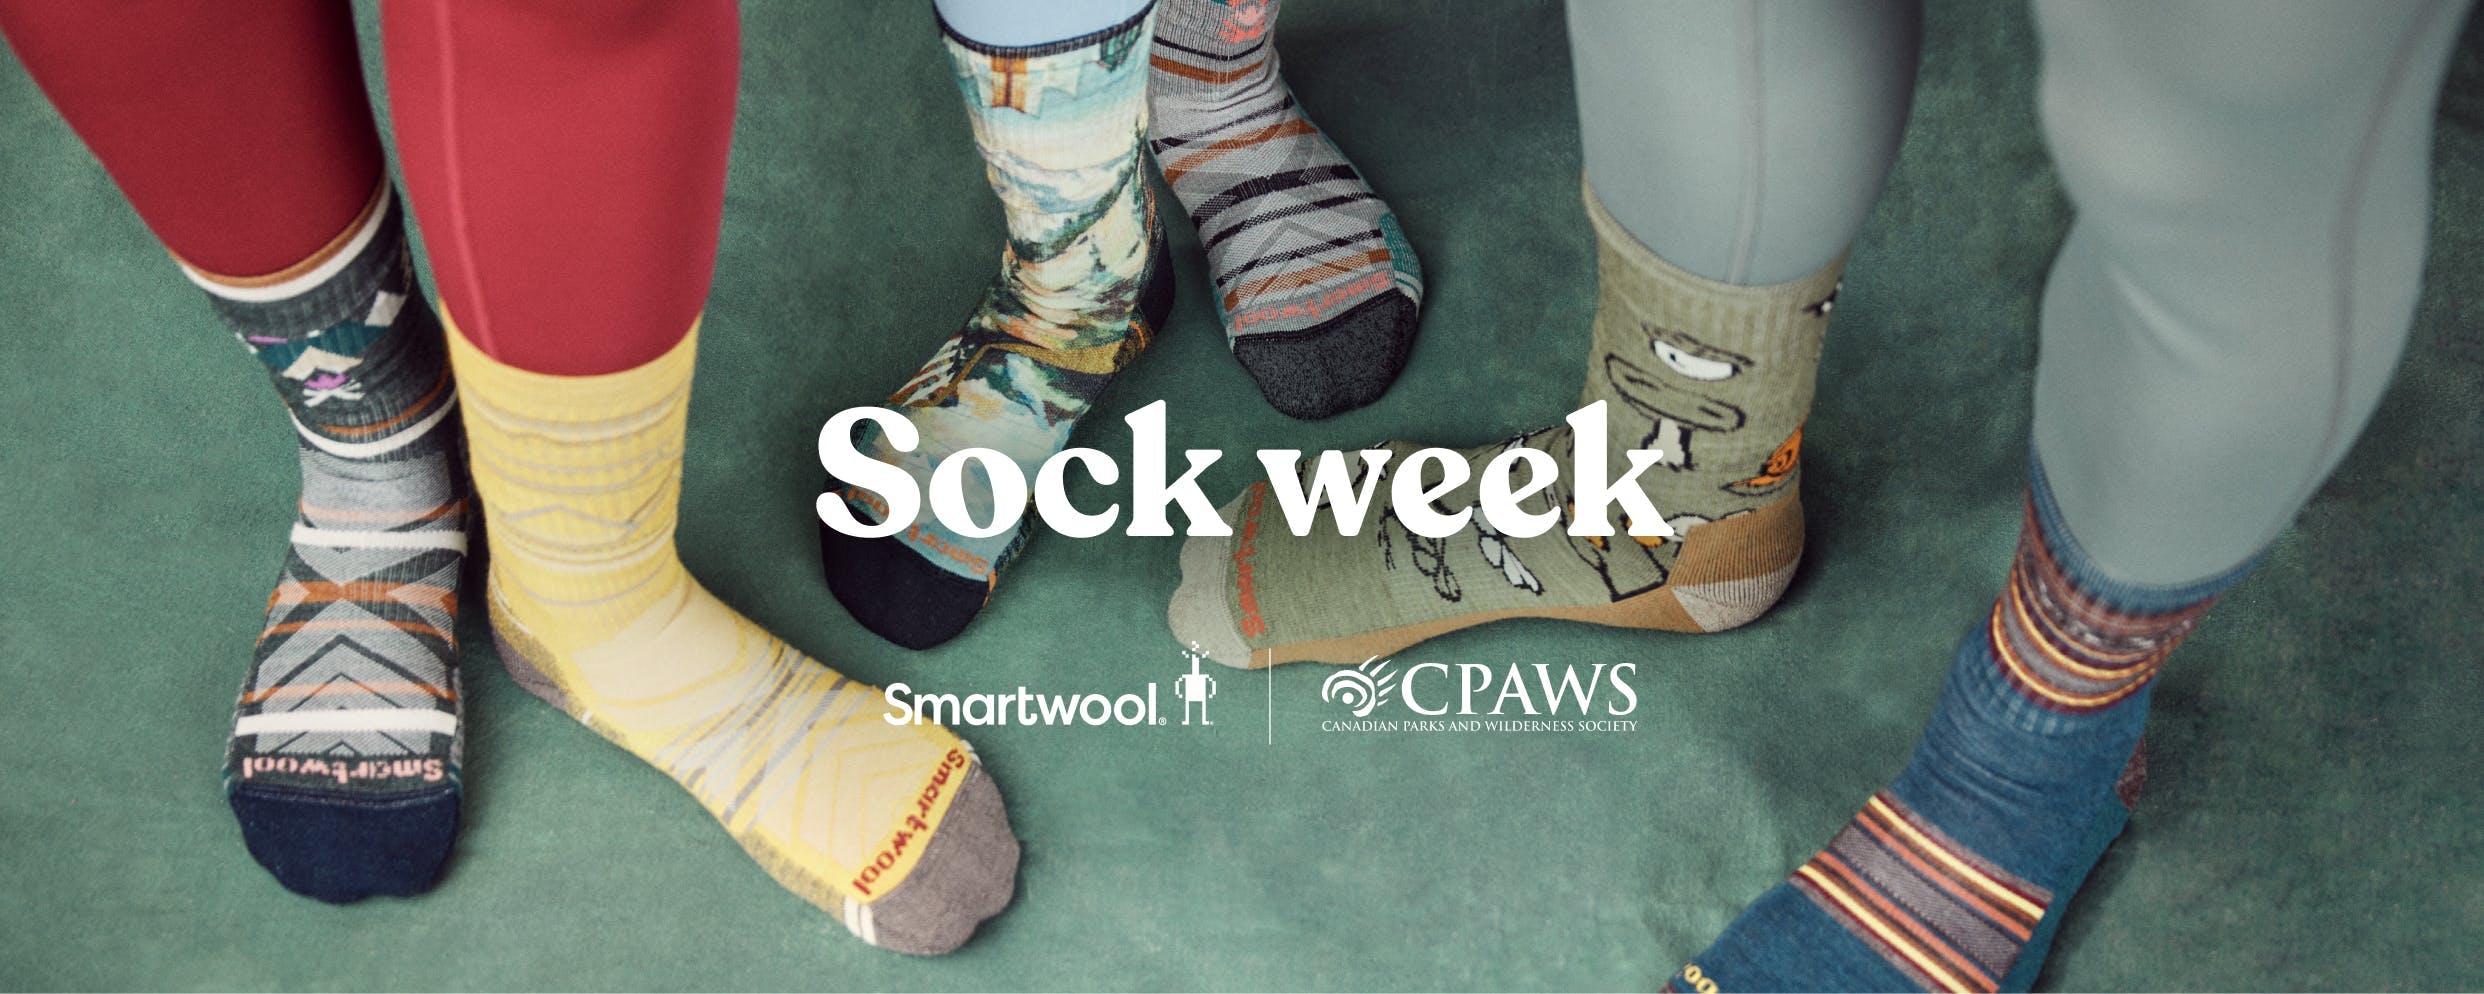 25% off Smartwool socks. Cozy sock savings, with $2 from each pair donated to the Canadian Parks and Wilderness Society (up to $15,000). Ends November 29. 